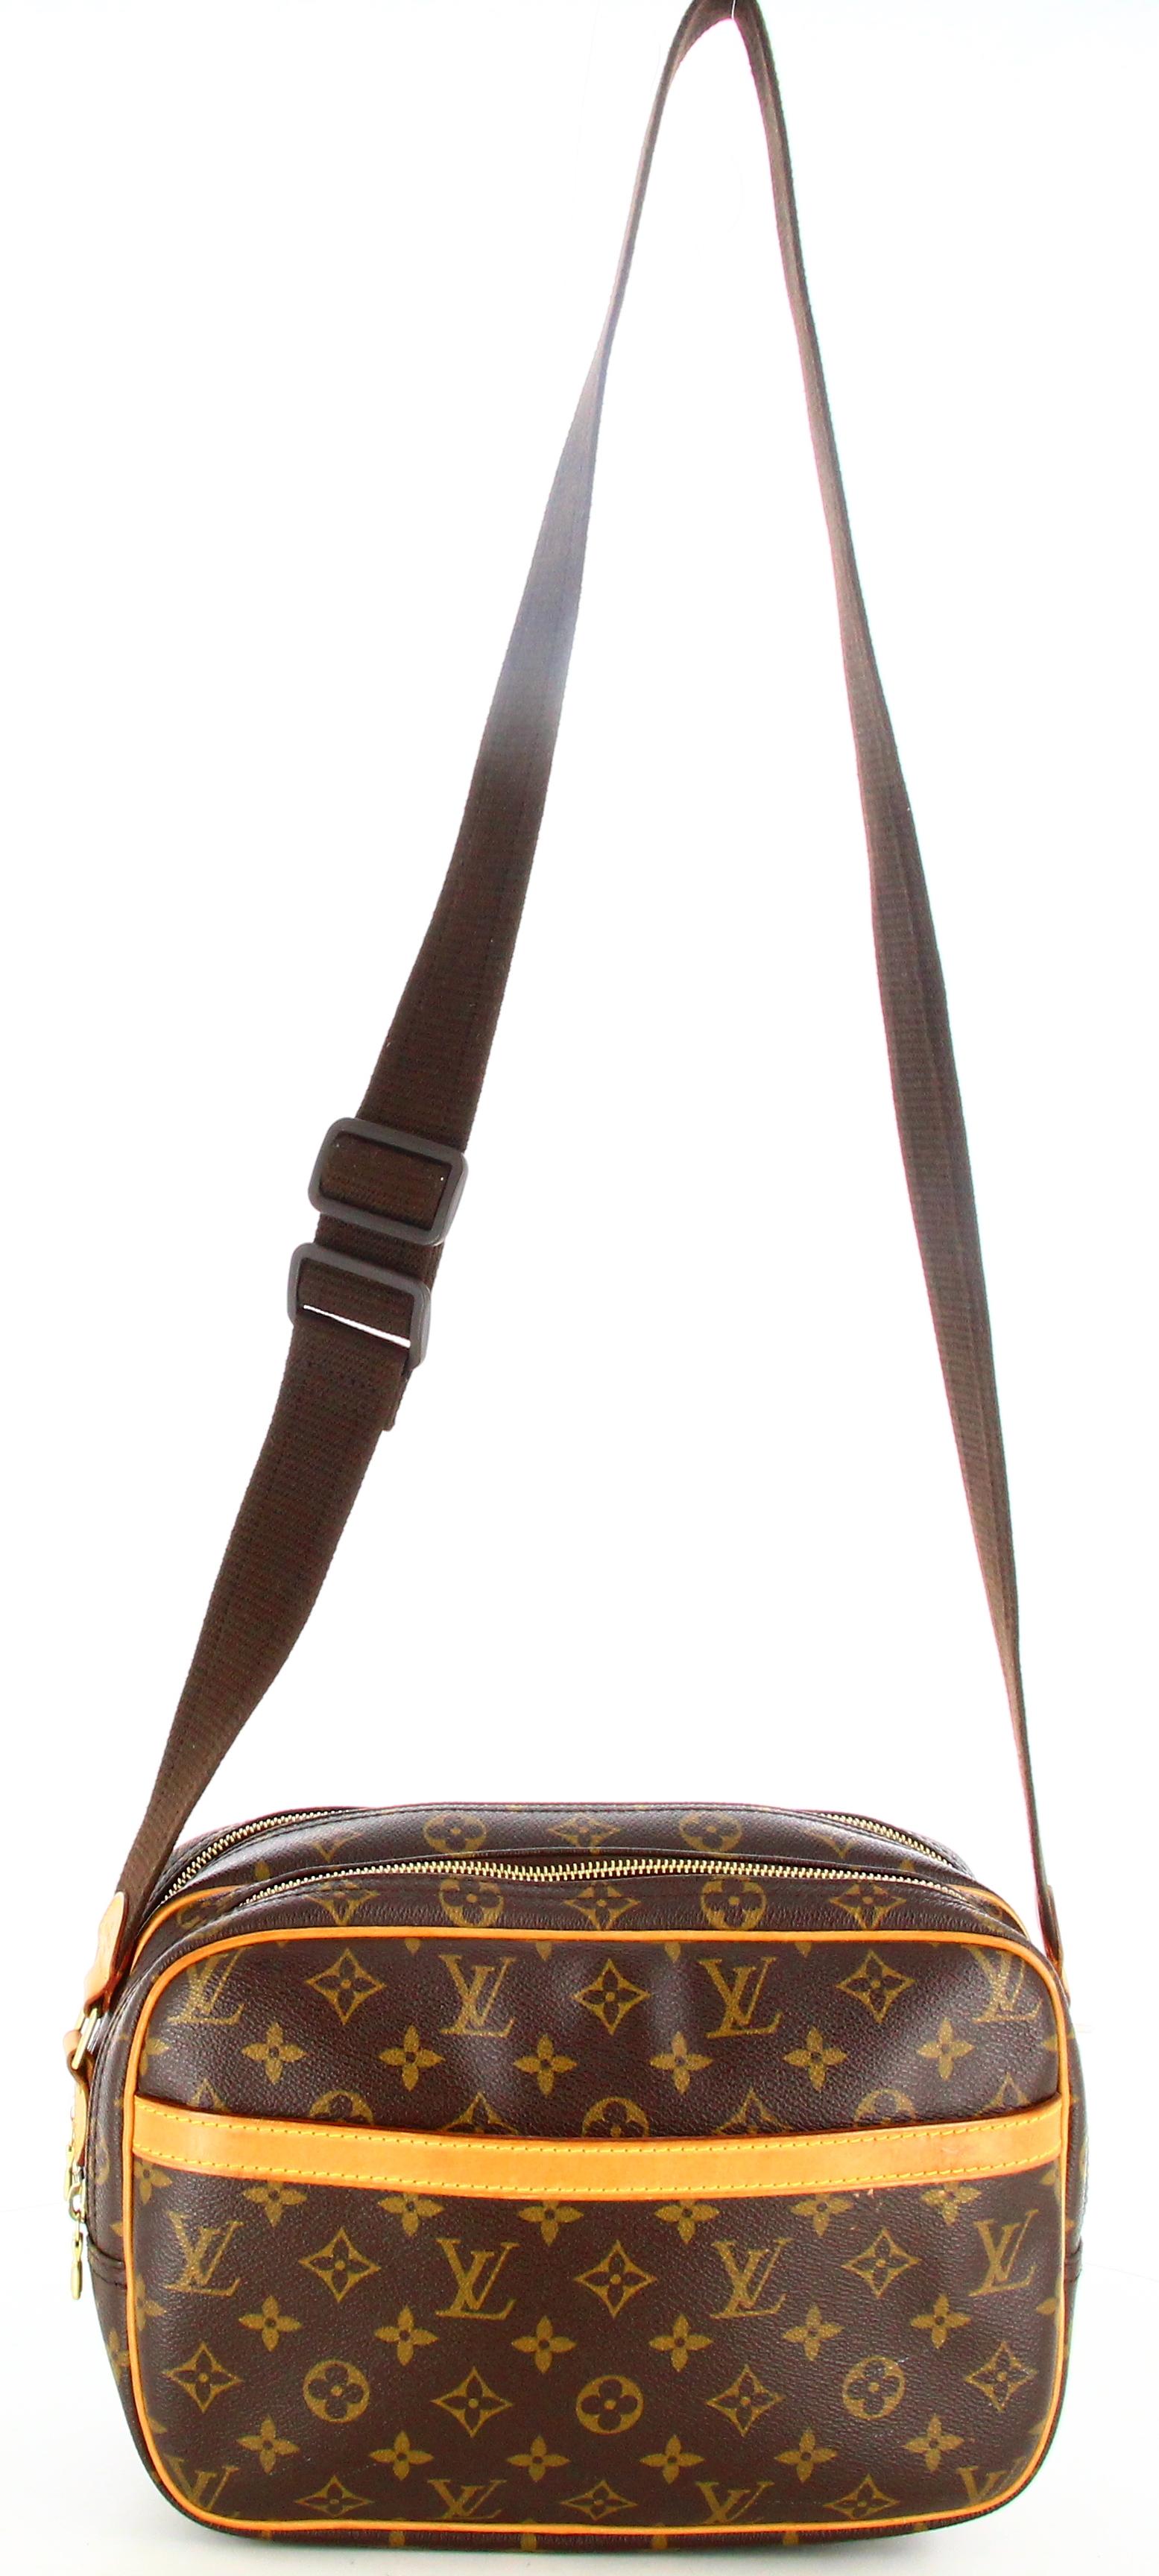 2003 Louis Vuitton Monogram Shoulder Bag Reporter PM

- Very good condition. Shows very slight signs of wear over time.
- Louis Vuitton shoulder bag 
- Two zipped parts
- One pocket on the front
- Slight odours 
- Brown fabric shoulder strap
-